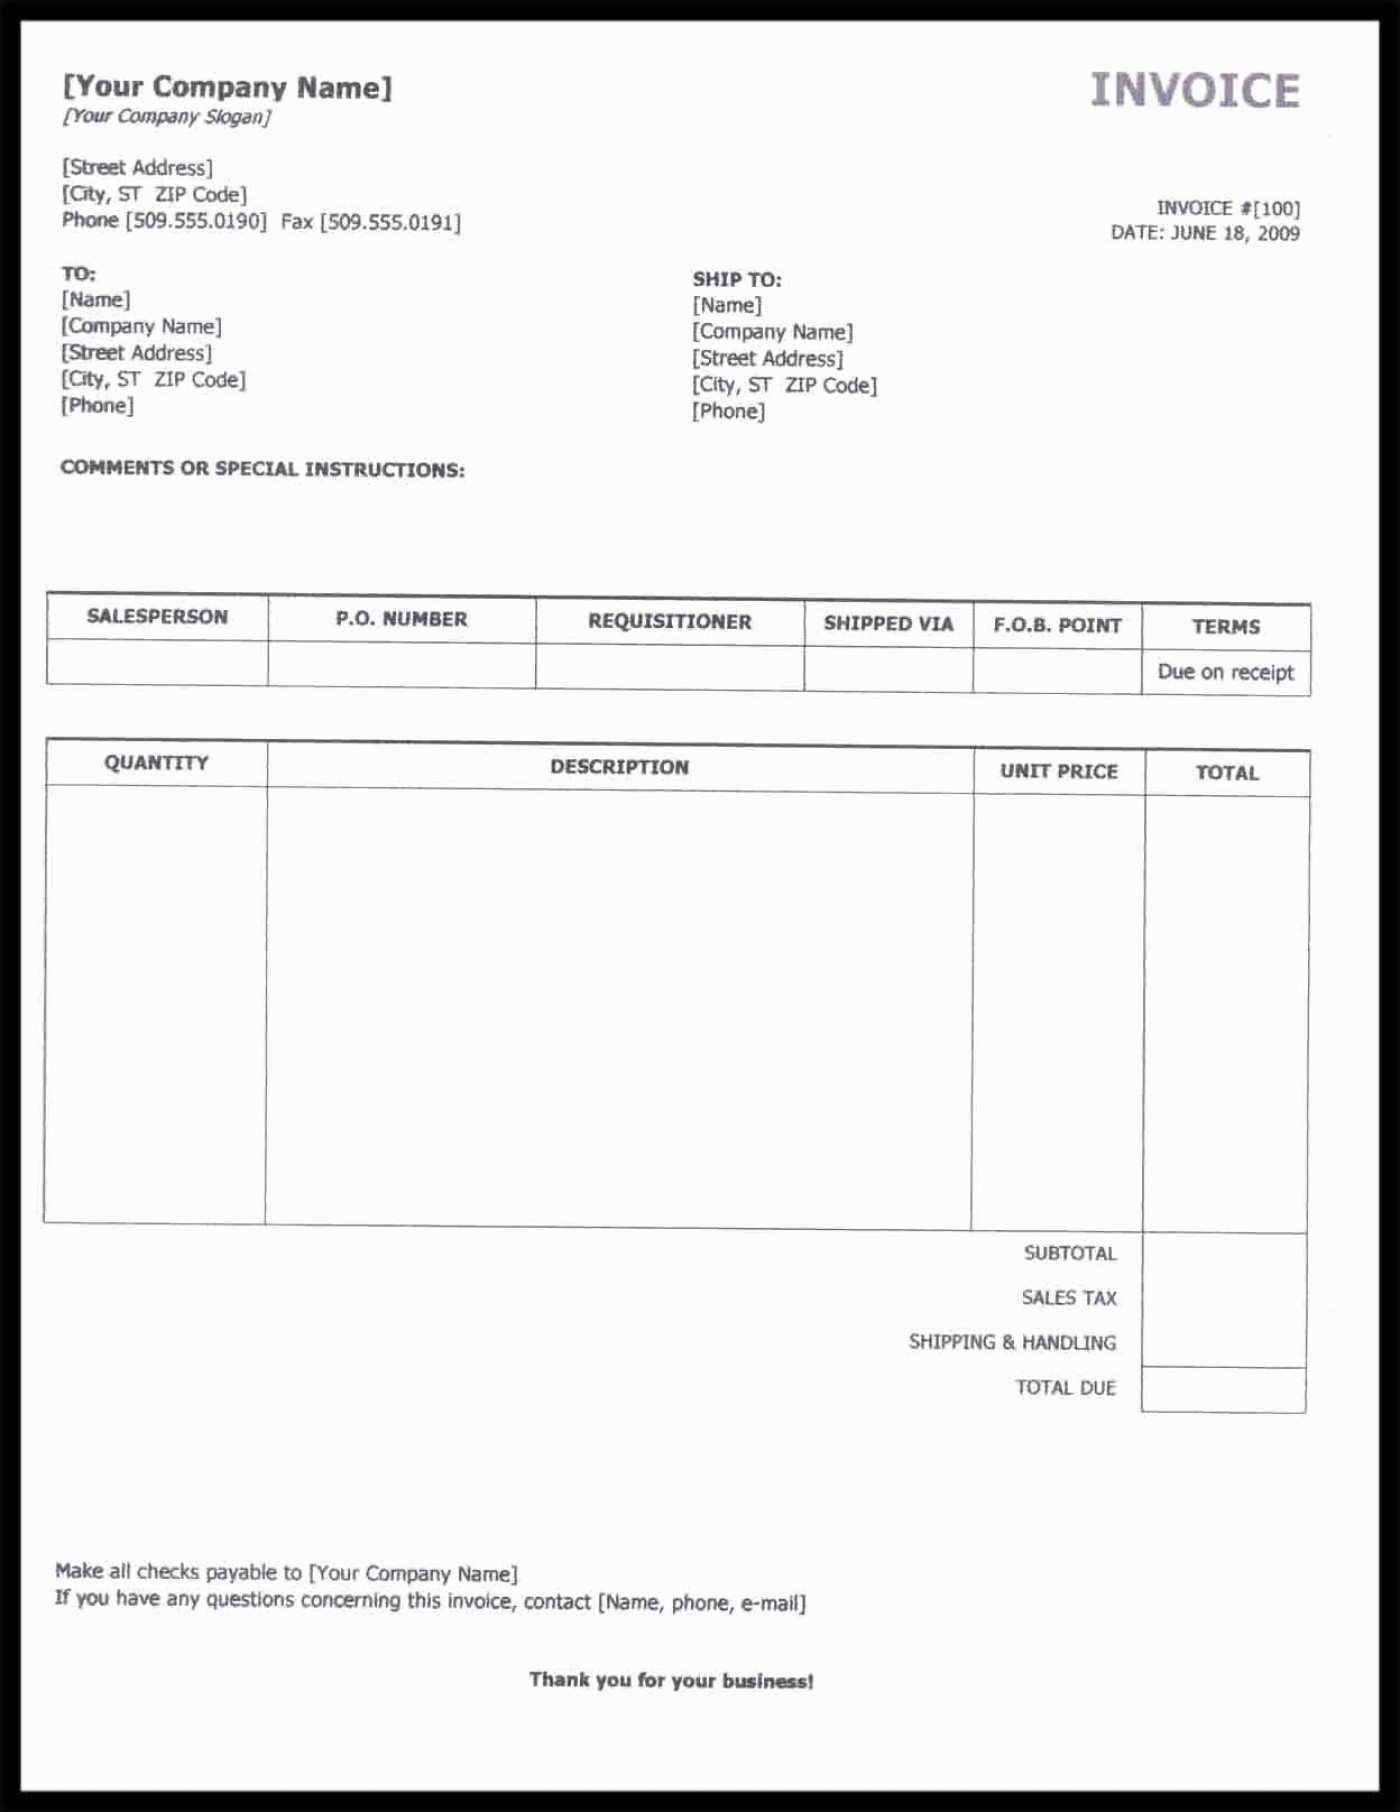 75 Blank Consulting Invoice Template Ontario Download with Consulting Invoice Template Ontario